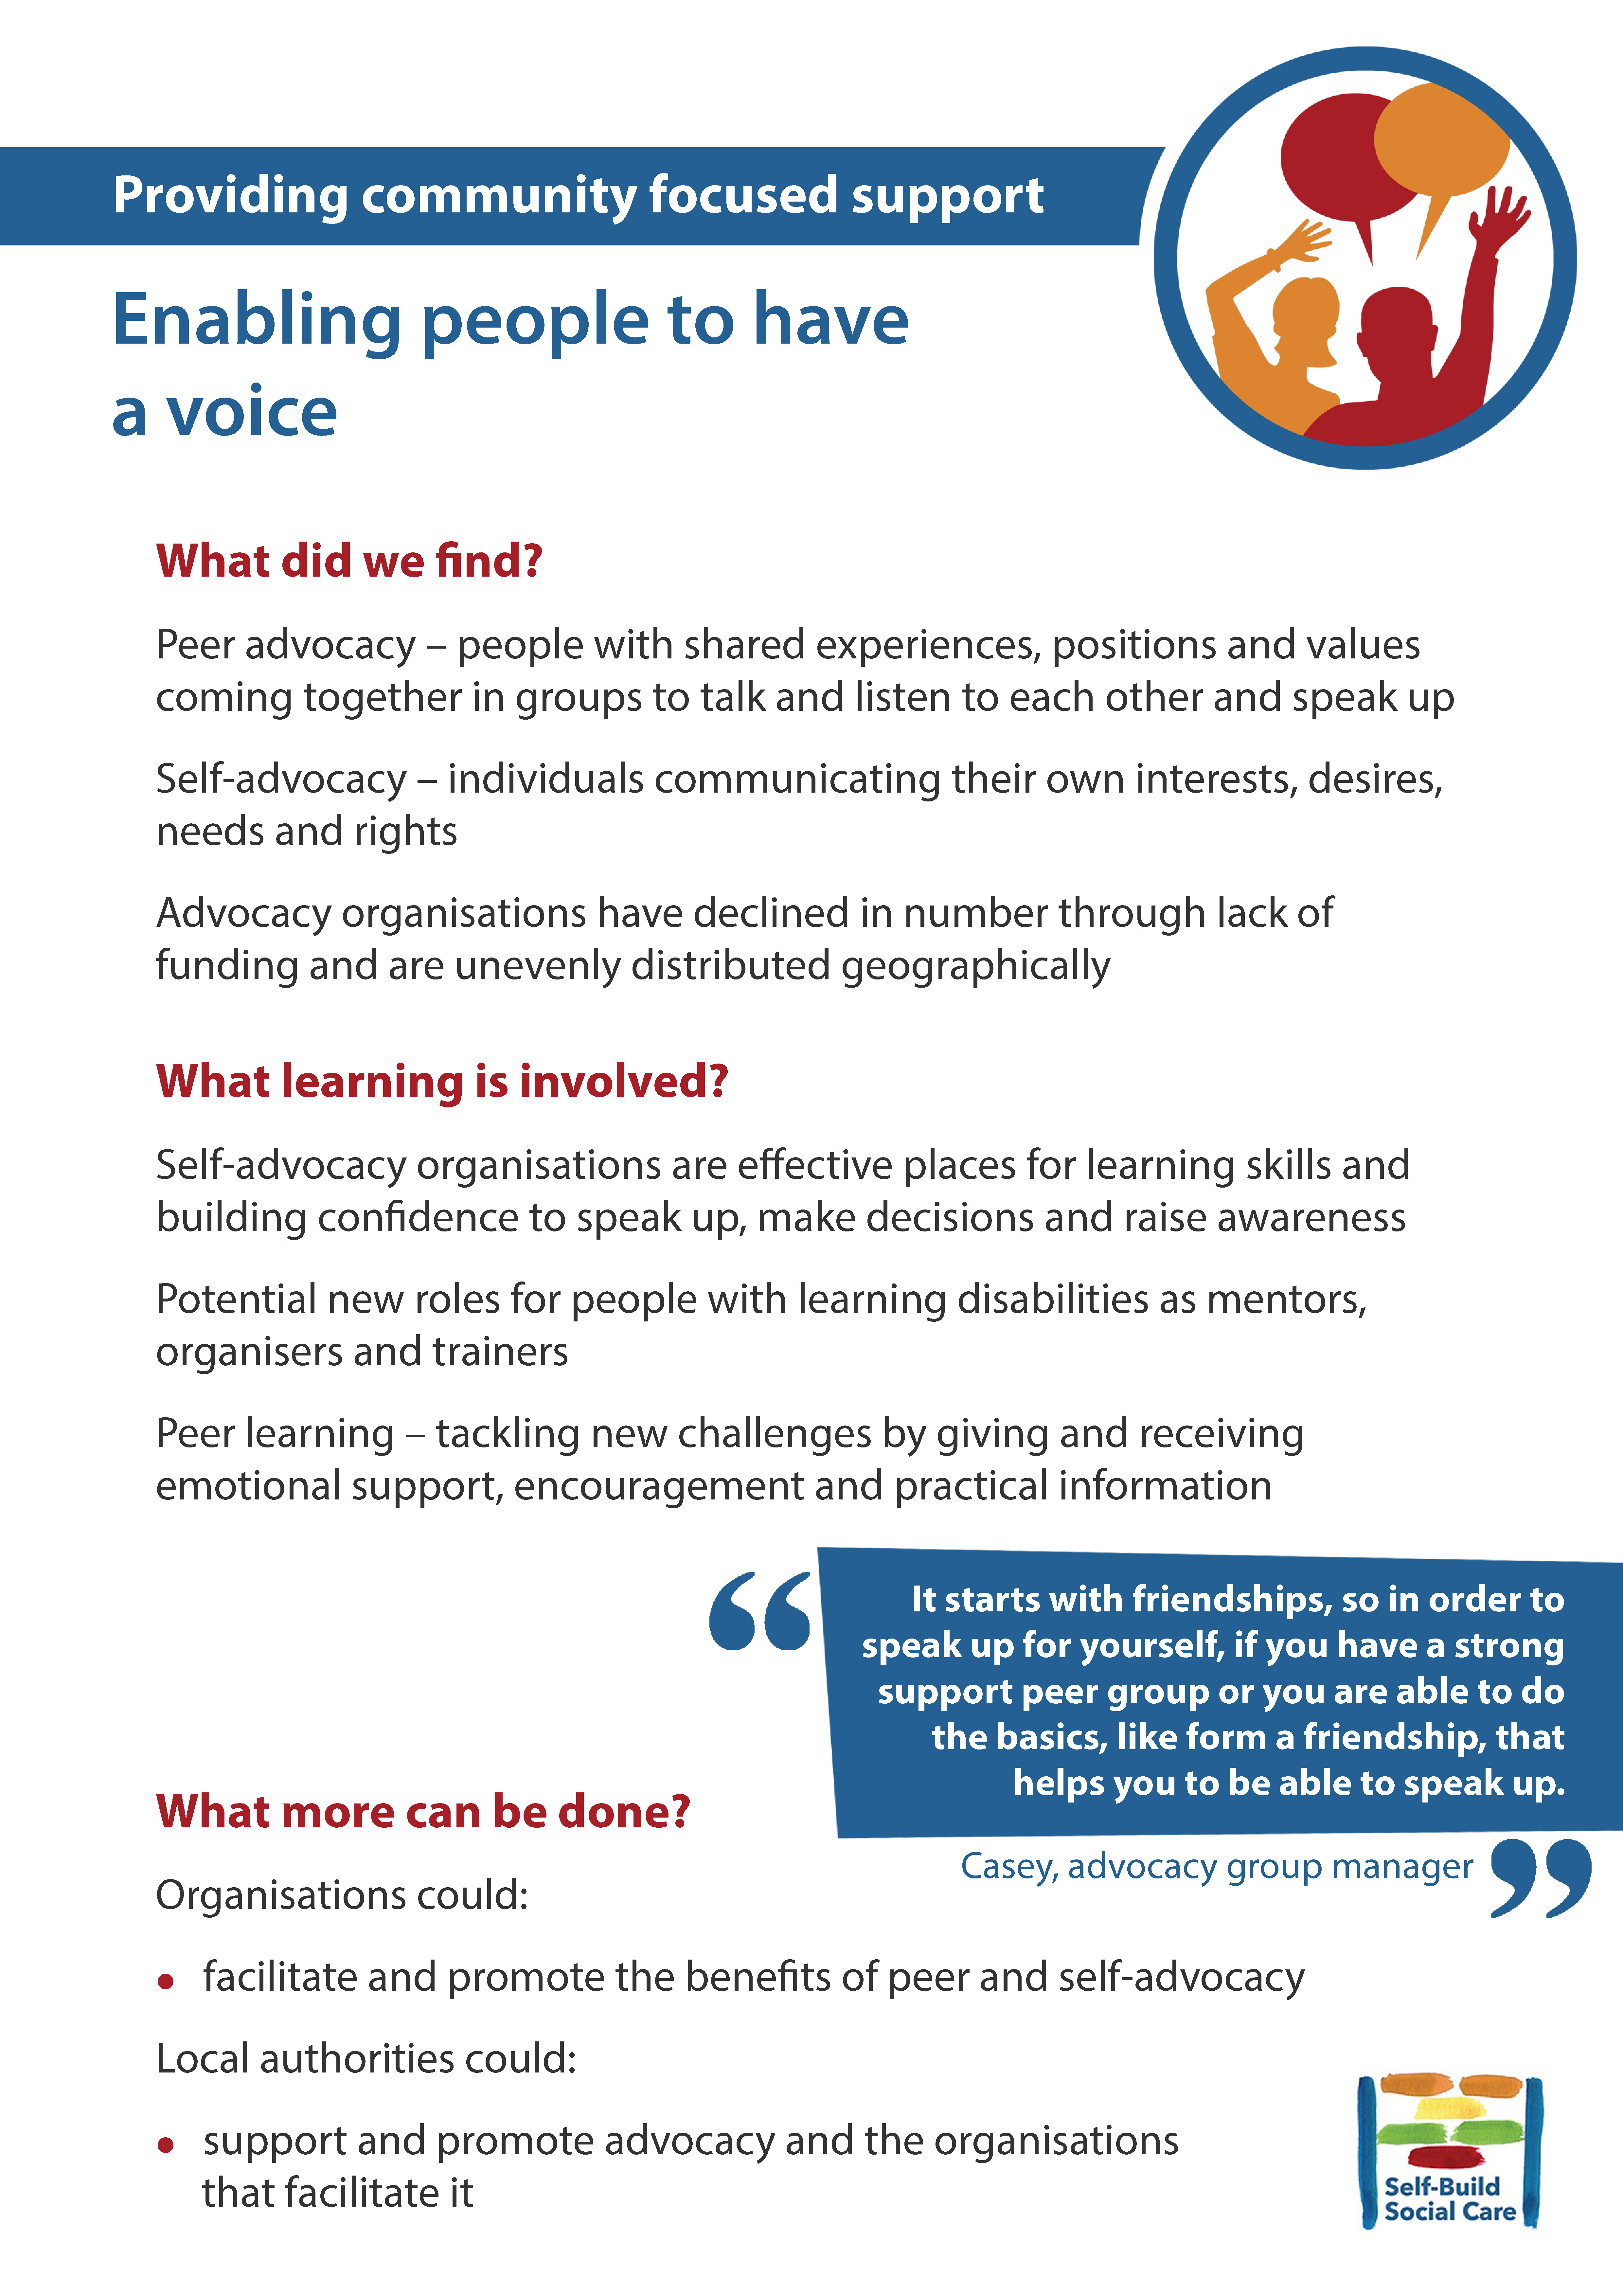 Enabling people to have a voice